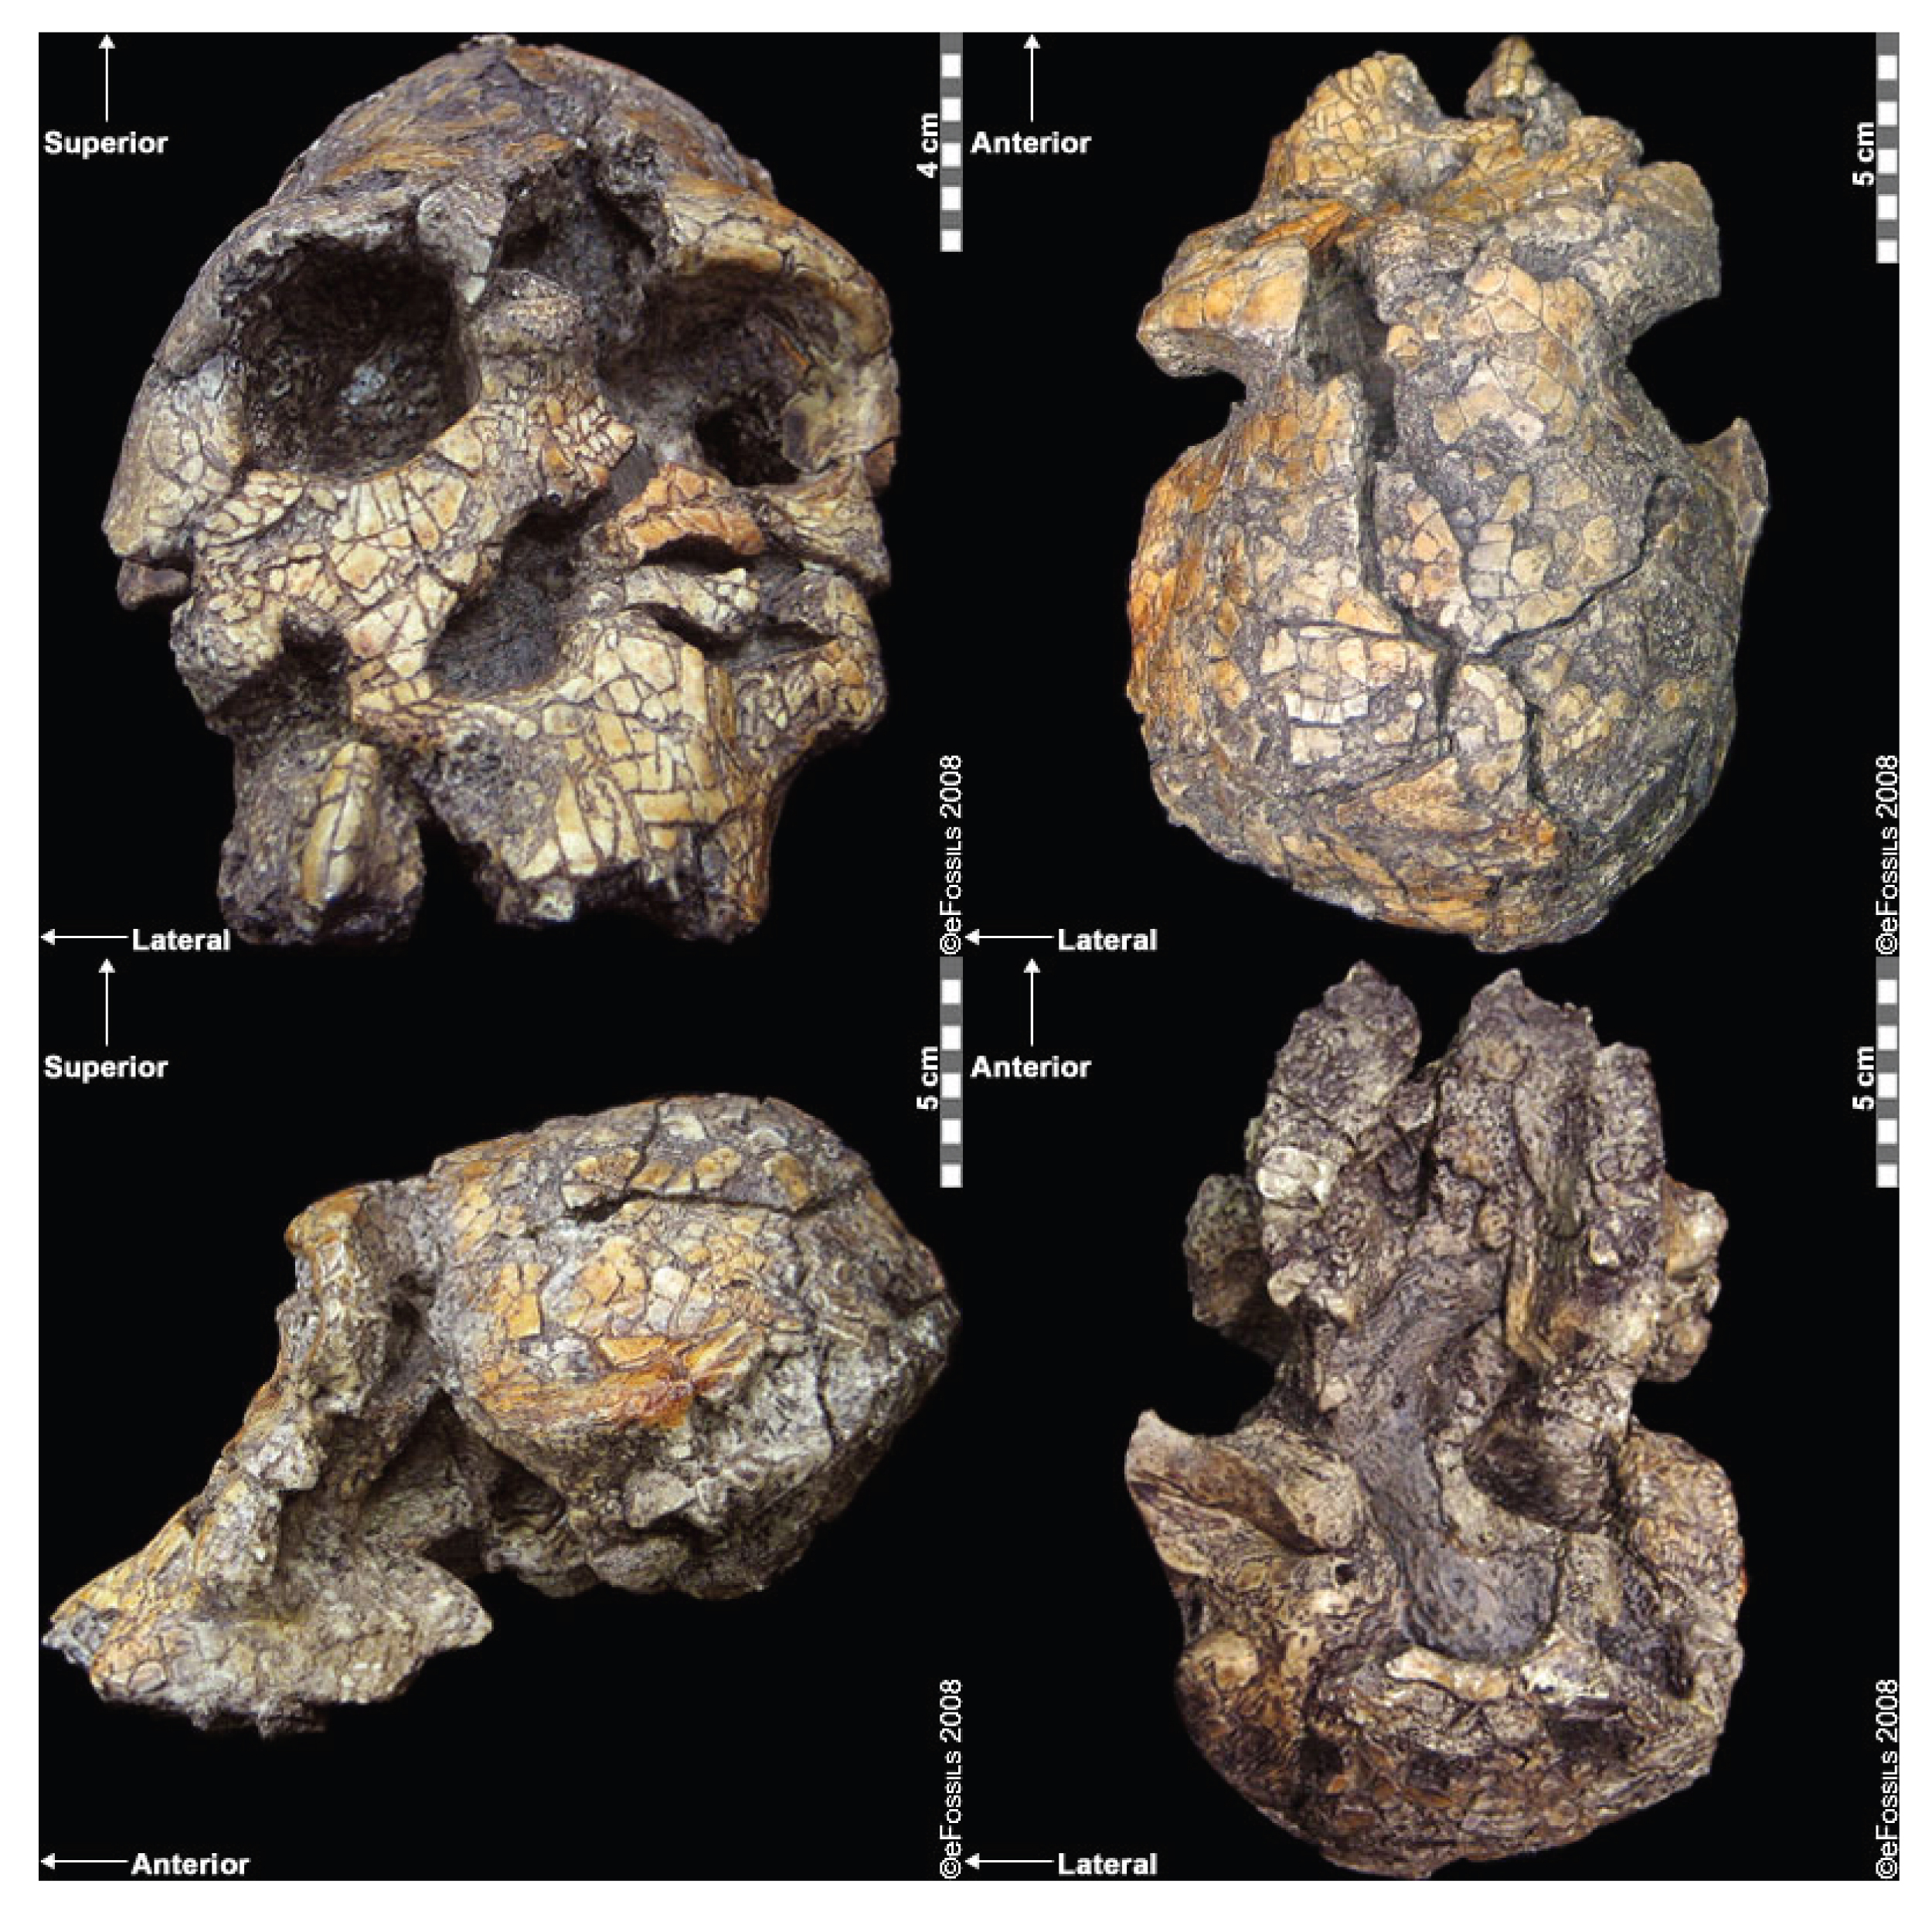 Four views of an ancient skull are shown on a black background.